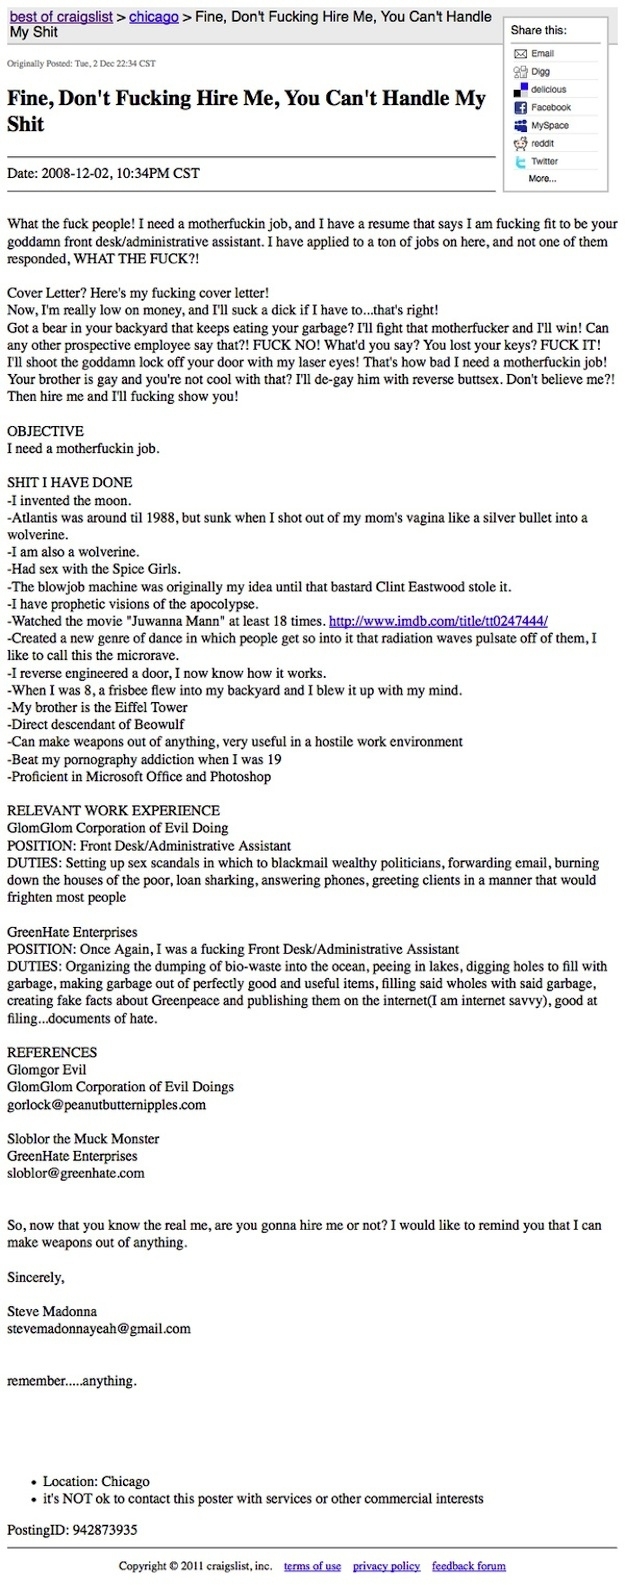 Really Awesome Resumes Built by real Awesome People. 